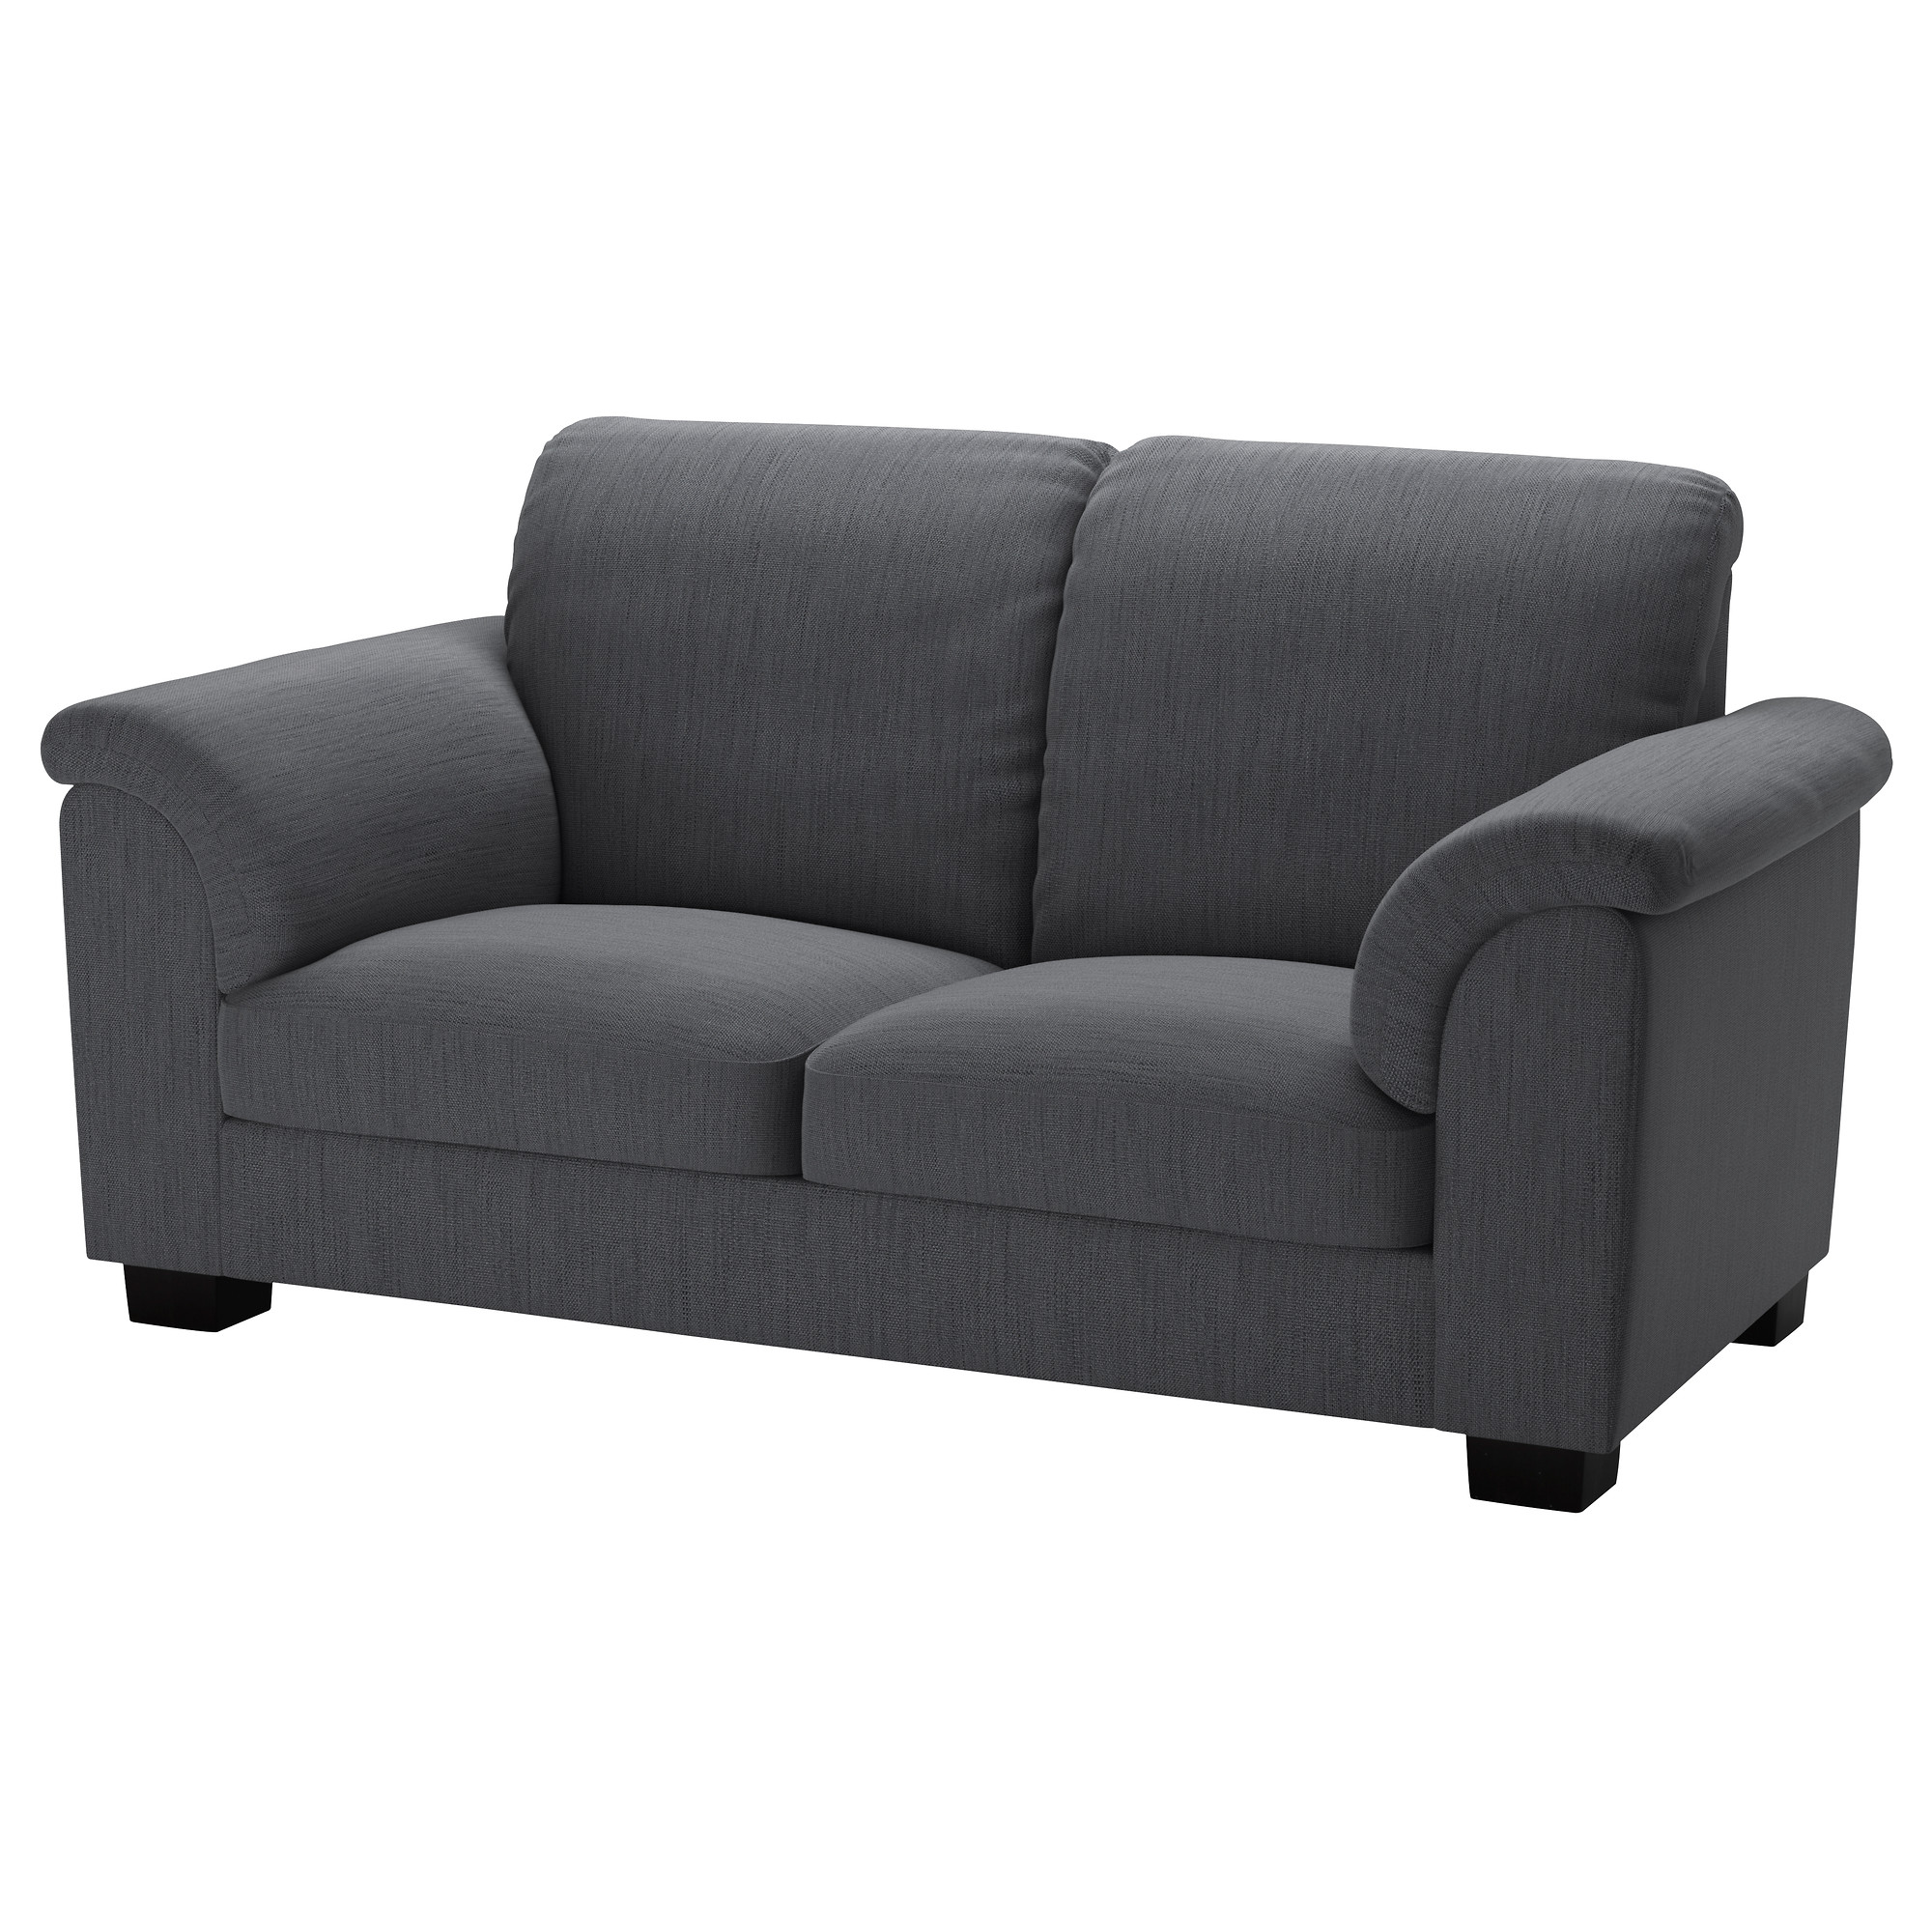 two seater sofa ikea tidafors two-seat sofa the high back gives good support for your neck BQBSPCS